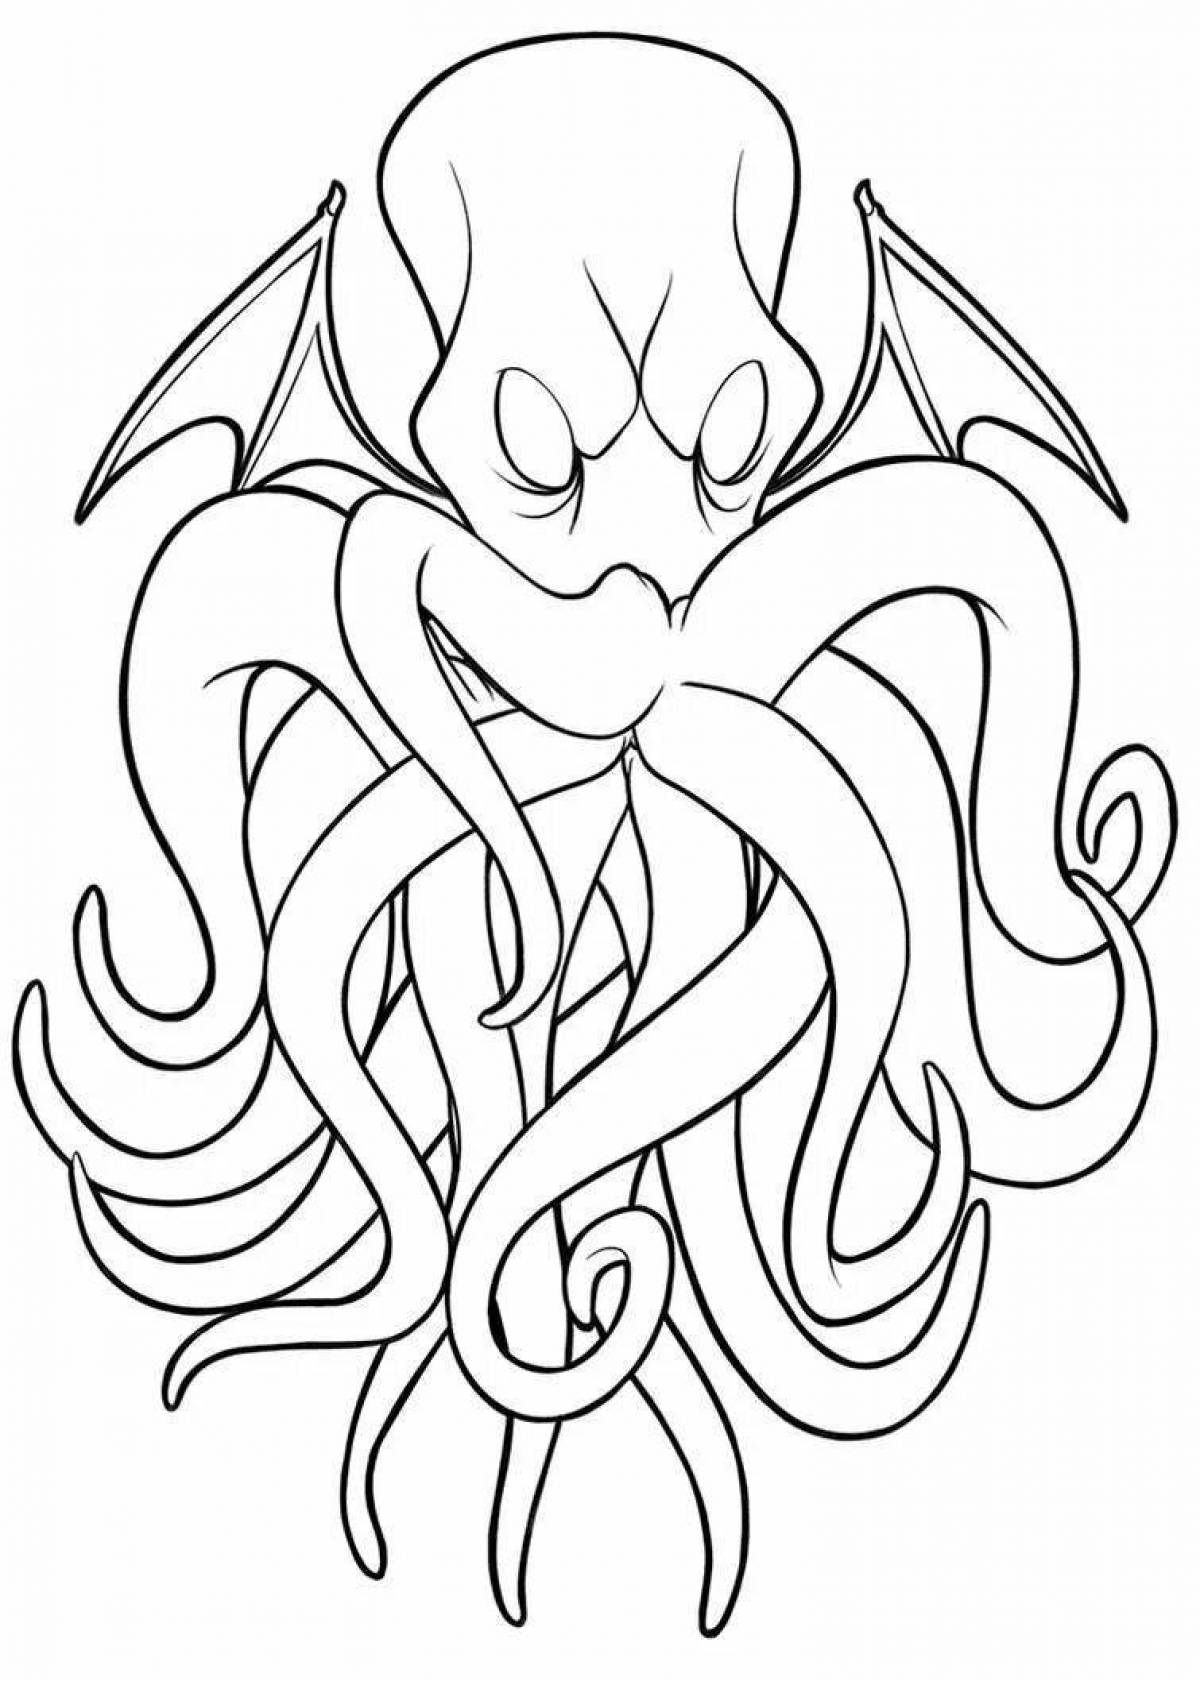 Gorgeous Cthulhu coloring book